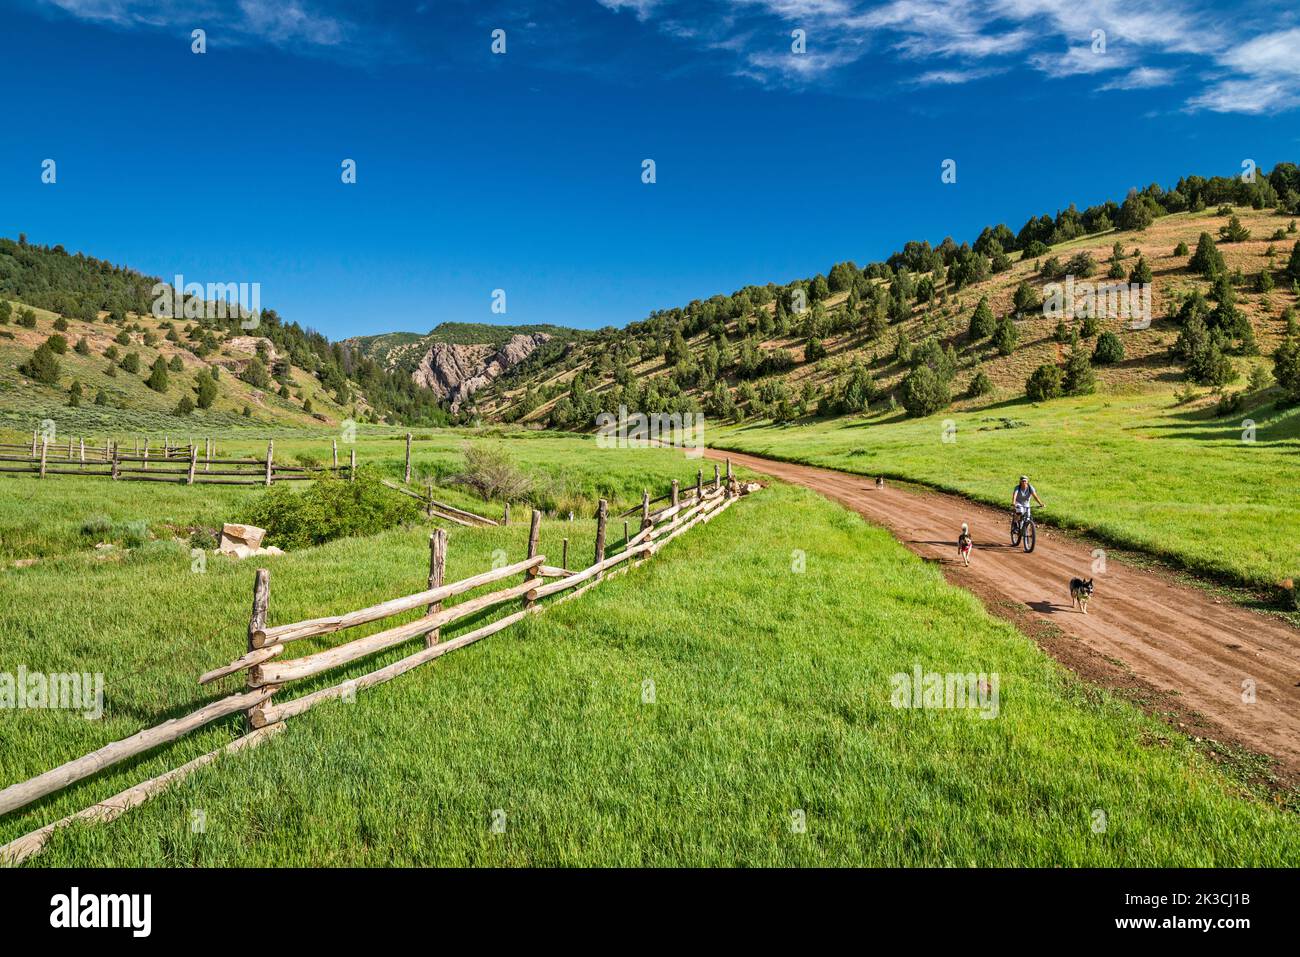 Giovane donna in bicicletta con i suoi tre cani, Rees Valley, Chicken Creek Road, FR 101, San Pitch Mountains, Uinta National Forest, Utah, USA Foto Stock